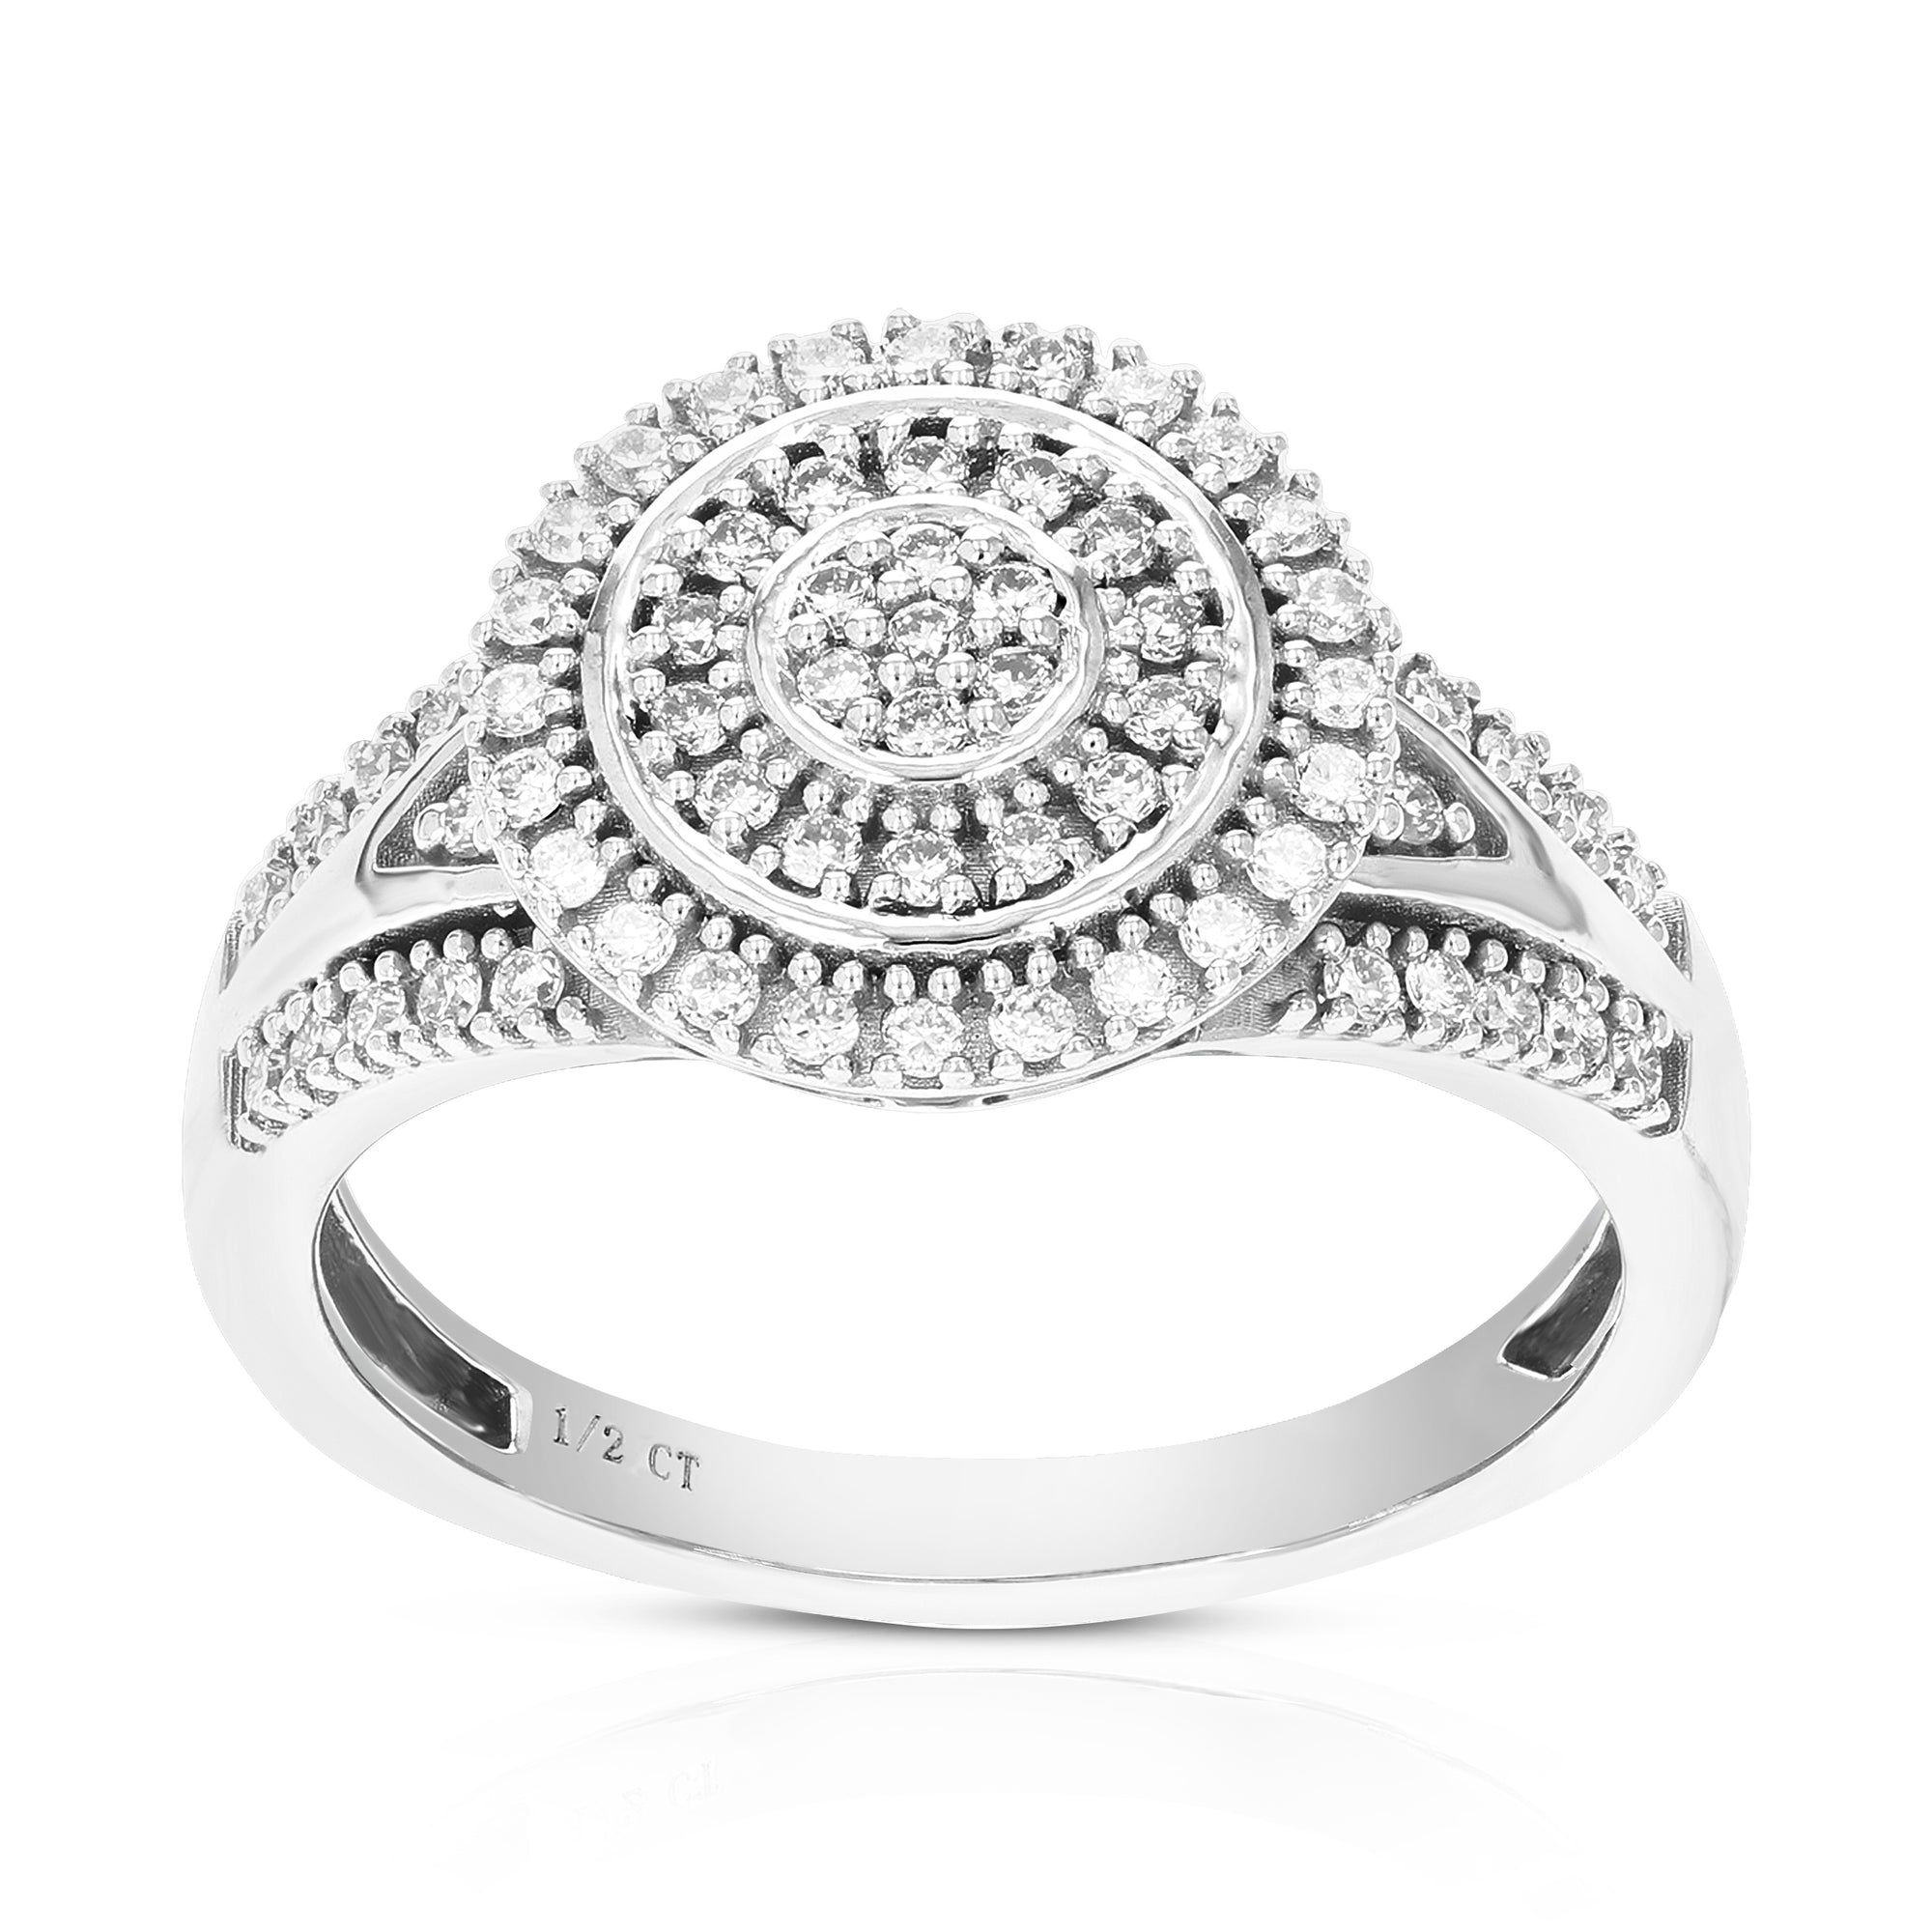 1/2 cttw Diamond Engagement Ring for Women, Round Lab Grown Diamond Ring in 0.925 Sterling Silver, Prong Setting, Size 6-8